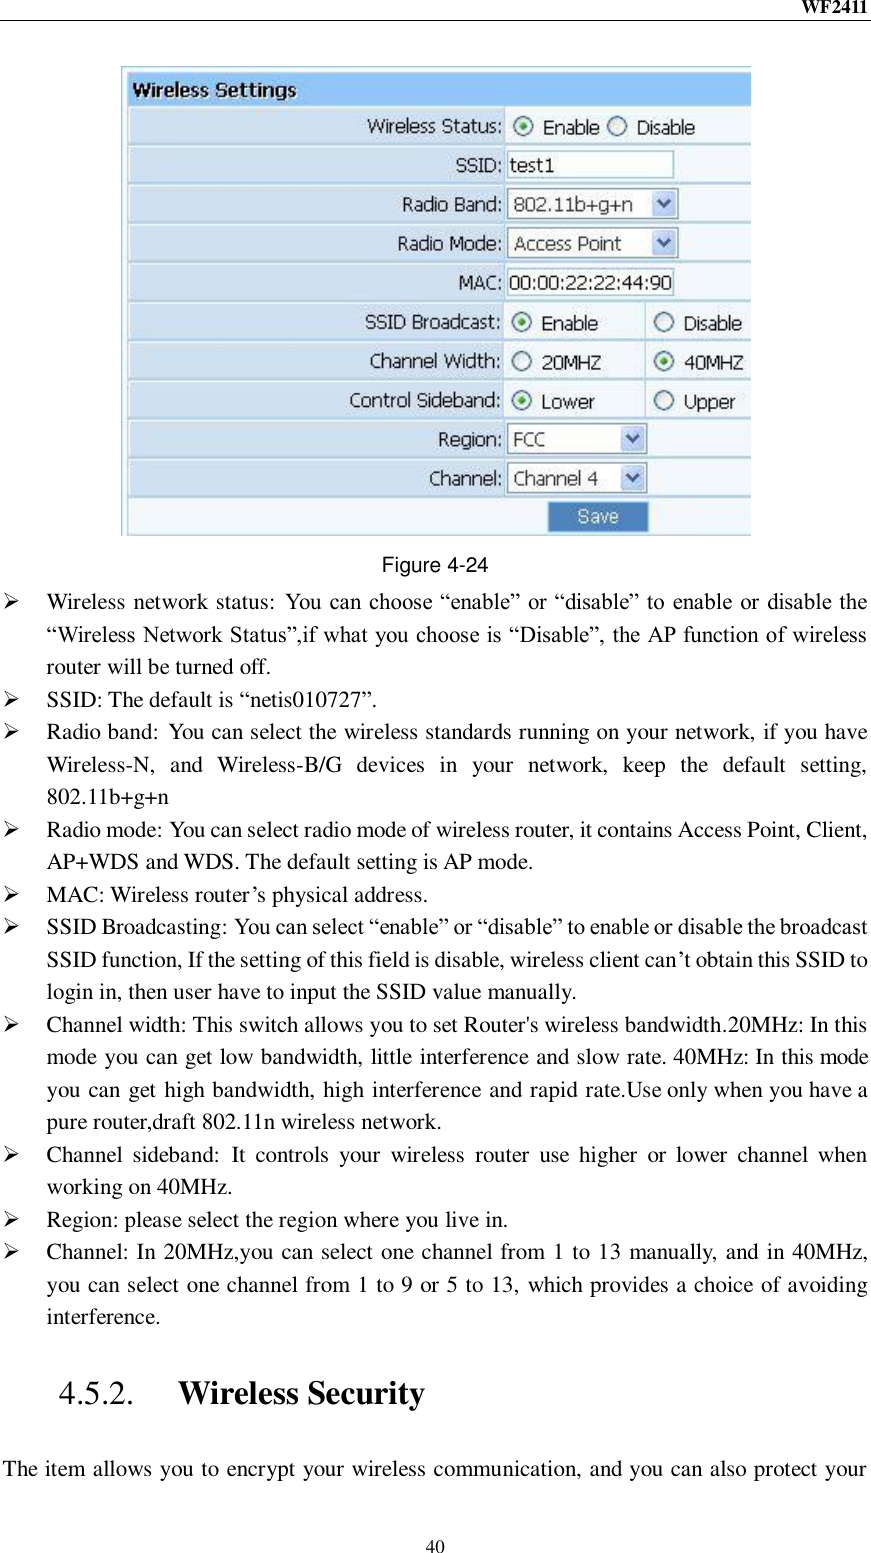 WF2411  40  Figure 4-24  Wireless network status:  You can choose “enable” or “disable” to enable or disable the “Wireless Network Status”,if what you choose is “Disable”, the AP function of wireless router will be turned off.  SSID: The default is “netis010727”.  Radio band:  You can select the wireless standards running on your network, if you have Wireless-N,  and  Wireless-B/G  devices  in  your  network,  keep  the  default  setting, 802.11b+g+n  Radio mode: You can select radio mode of wireless router, it contains Access Point, Client, AP+WDS and WDS. The default setting is AP mode.  MAC: Wireless router‟s physical address.  SSID Broadcasting: You can select “enable” or “disable” to enable or disable the broadcast SSID function, If the setting of this field is disable, wireless client can‟t obtain this SSID to login in, then user have to input the SSID value manually.  Channel width: This switch allows you to set Router&apos;s wireless bandwidth.20MHz: In this mode you can get low bandwidth, little interference and slow rate. 40MHz: In this mode you can get high bandwidth, high interference and rapid rate.Use only when you have a pure router,draft 802.11n wireless network.  Channel  sideband:  It  controls  your  wireless  router  use  higher  or  lower  channel  when working on 40MHz.  Region: please select the region where you live in.  Channel: In 20MHz,you can select one channel from 1 to 13 manually, and in 40MHz, you can select one channel from 1 to 9 or 5 to 13, which provides a choice of avoiding interference. 4.5.2. Wireless Security The item allows you to encrypt your wireless communication, and you can also protect your 